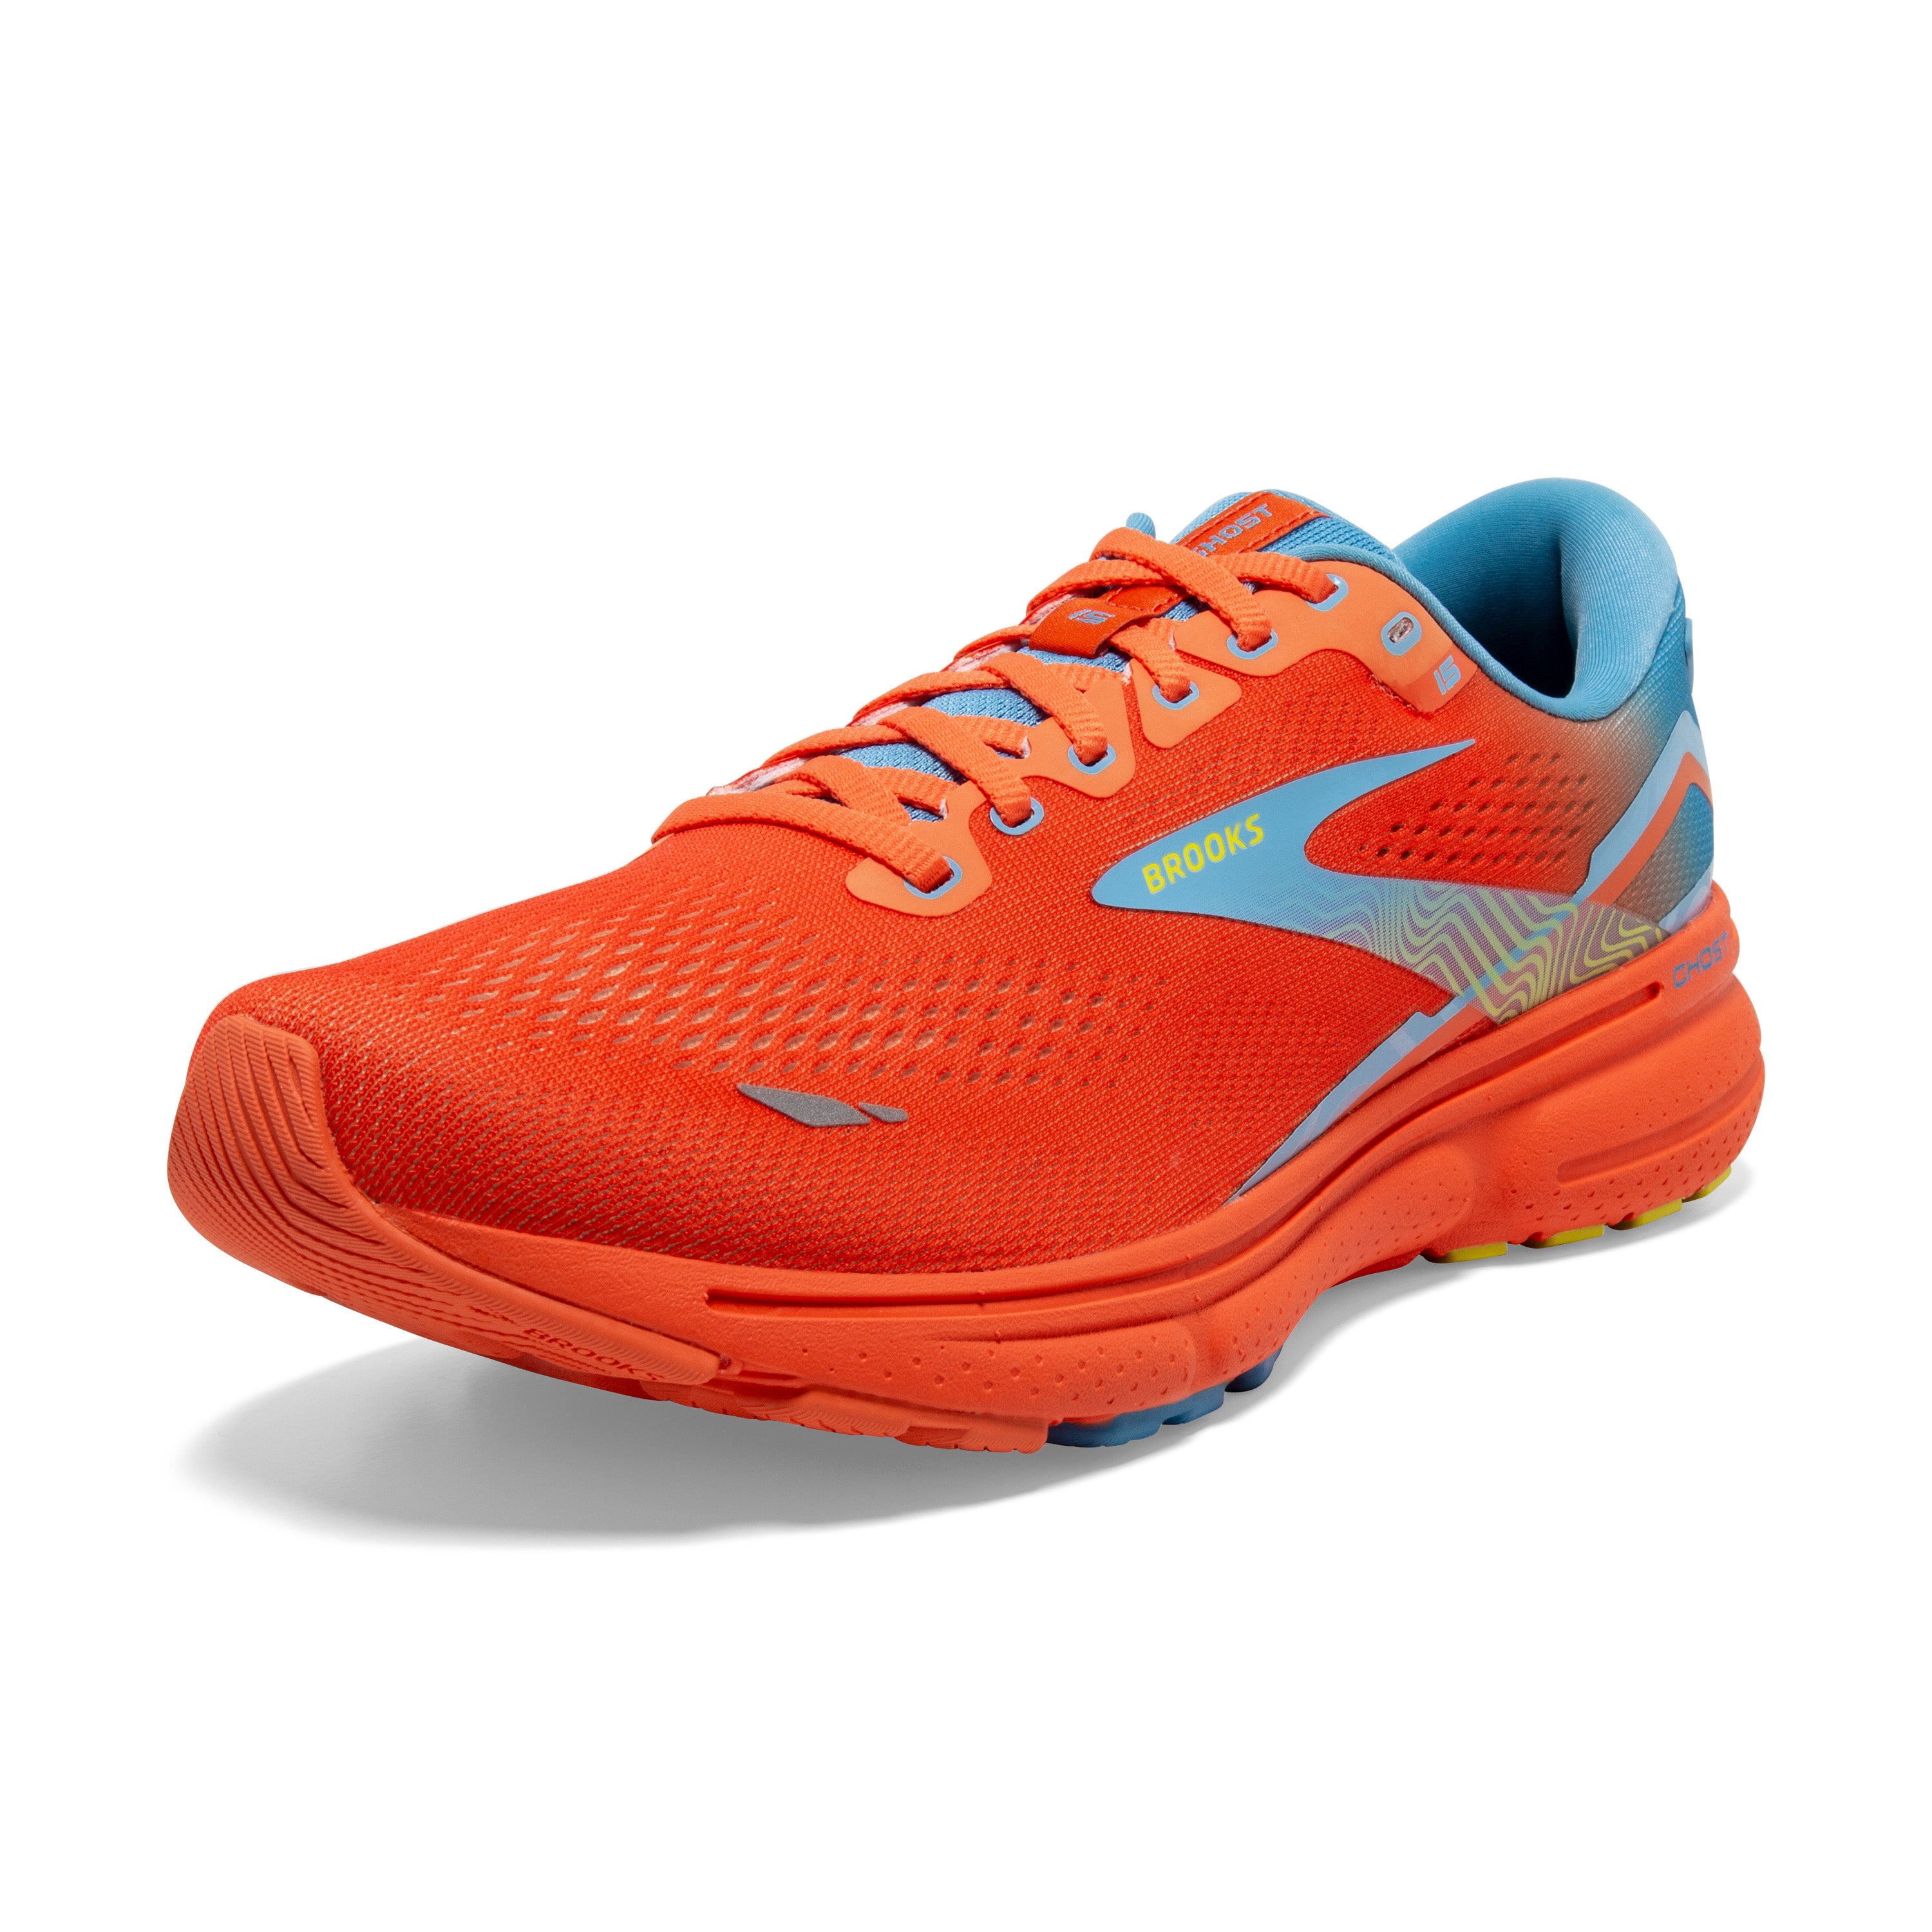 Ghost 15 LE - Men's Road Running Shoes